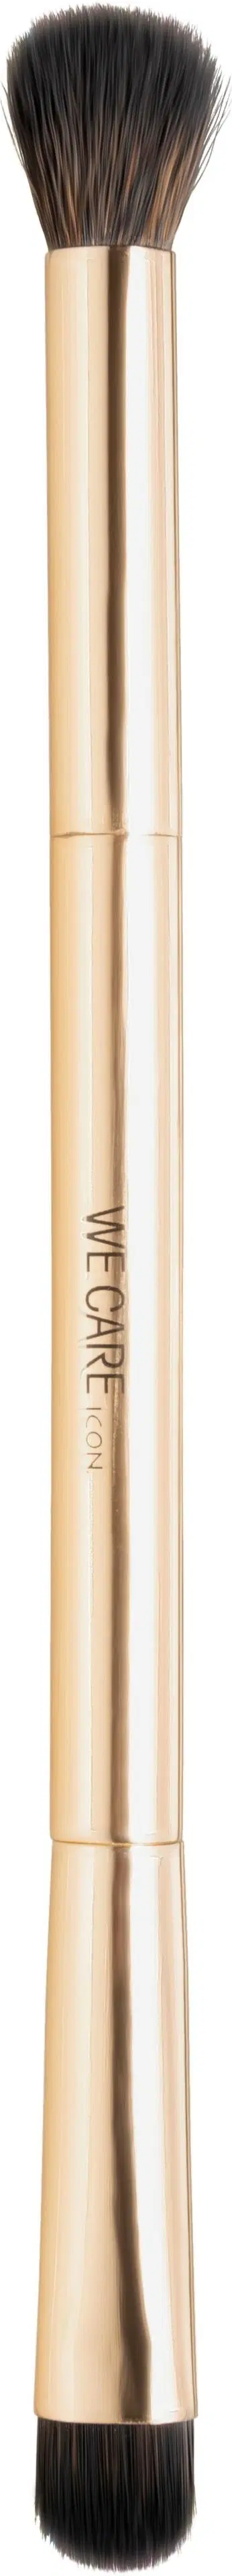 WE CARE ICON. Luxe Eyes shadow and blend silmämeikkisivellin